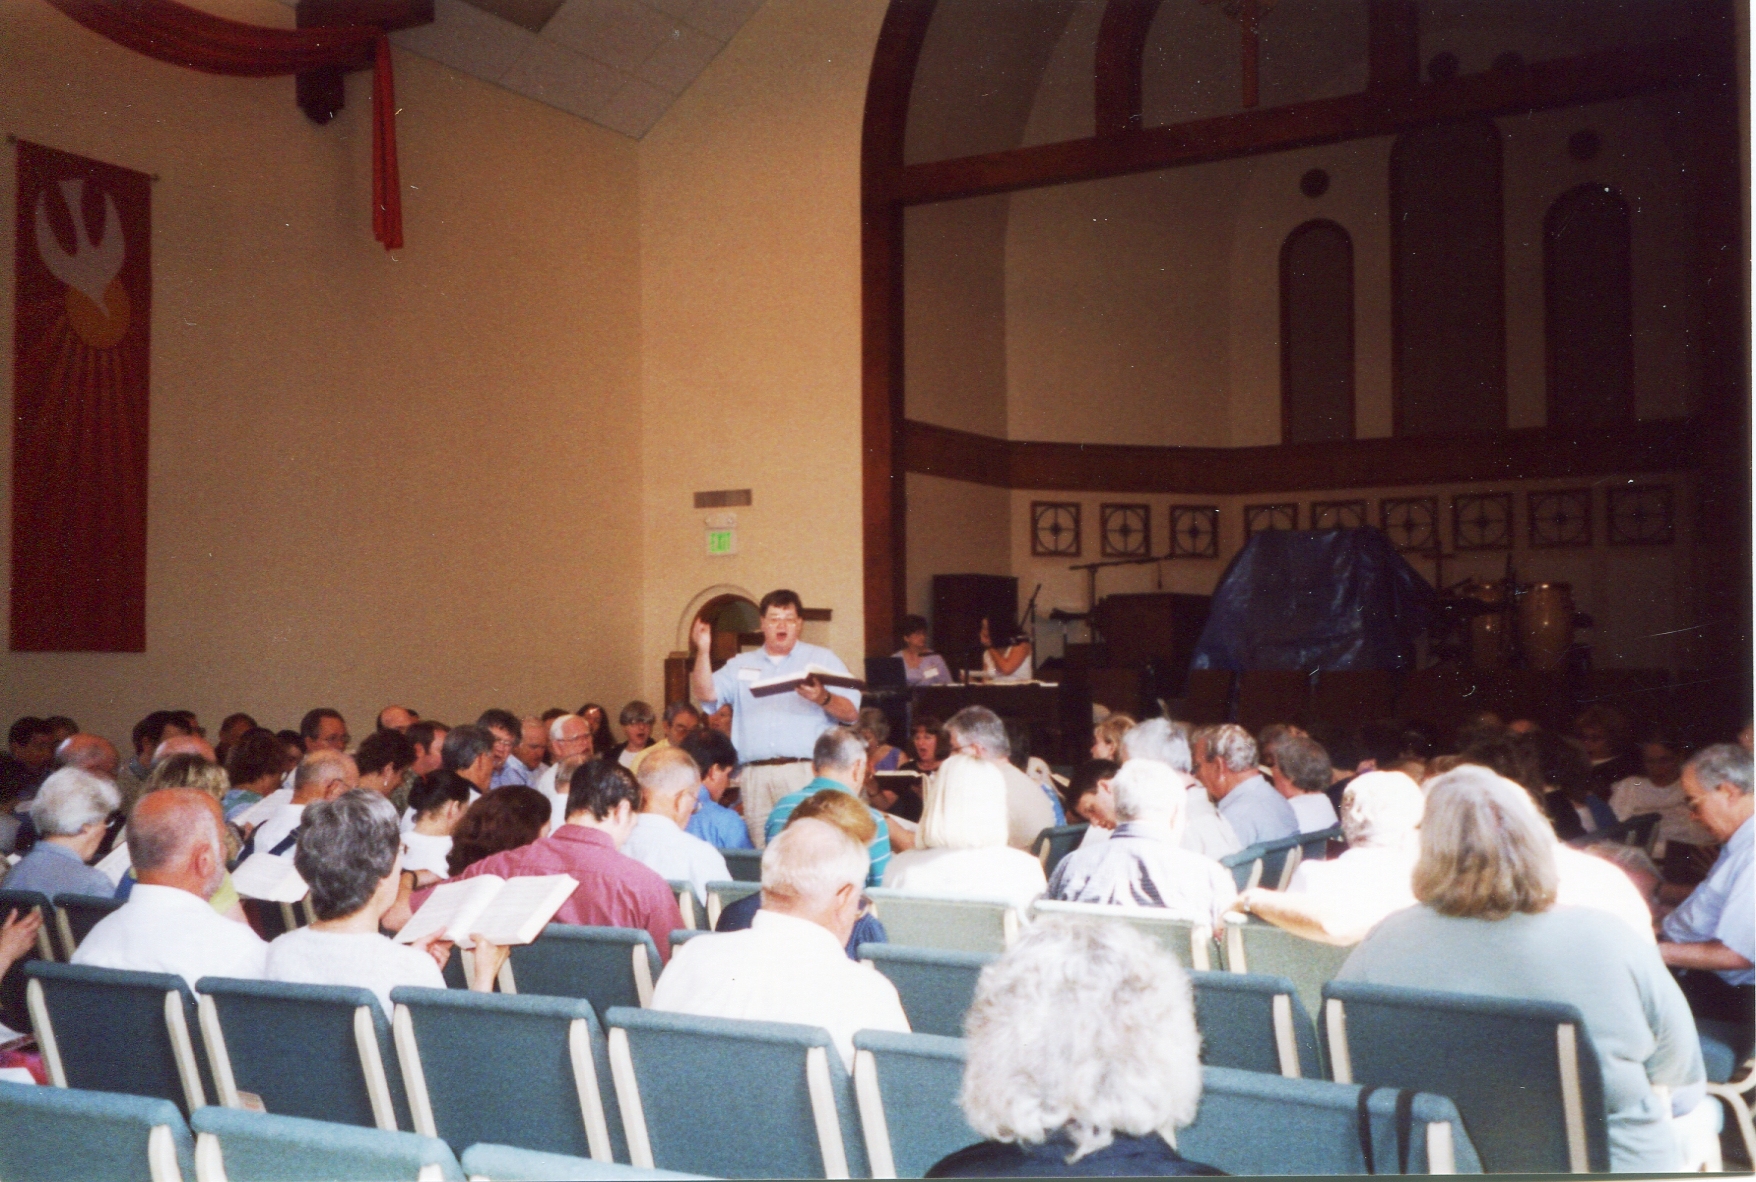 At the National Shape Note Singing Convention in Birmingham AL, 2002.